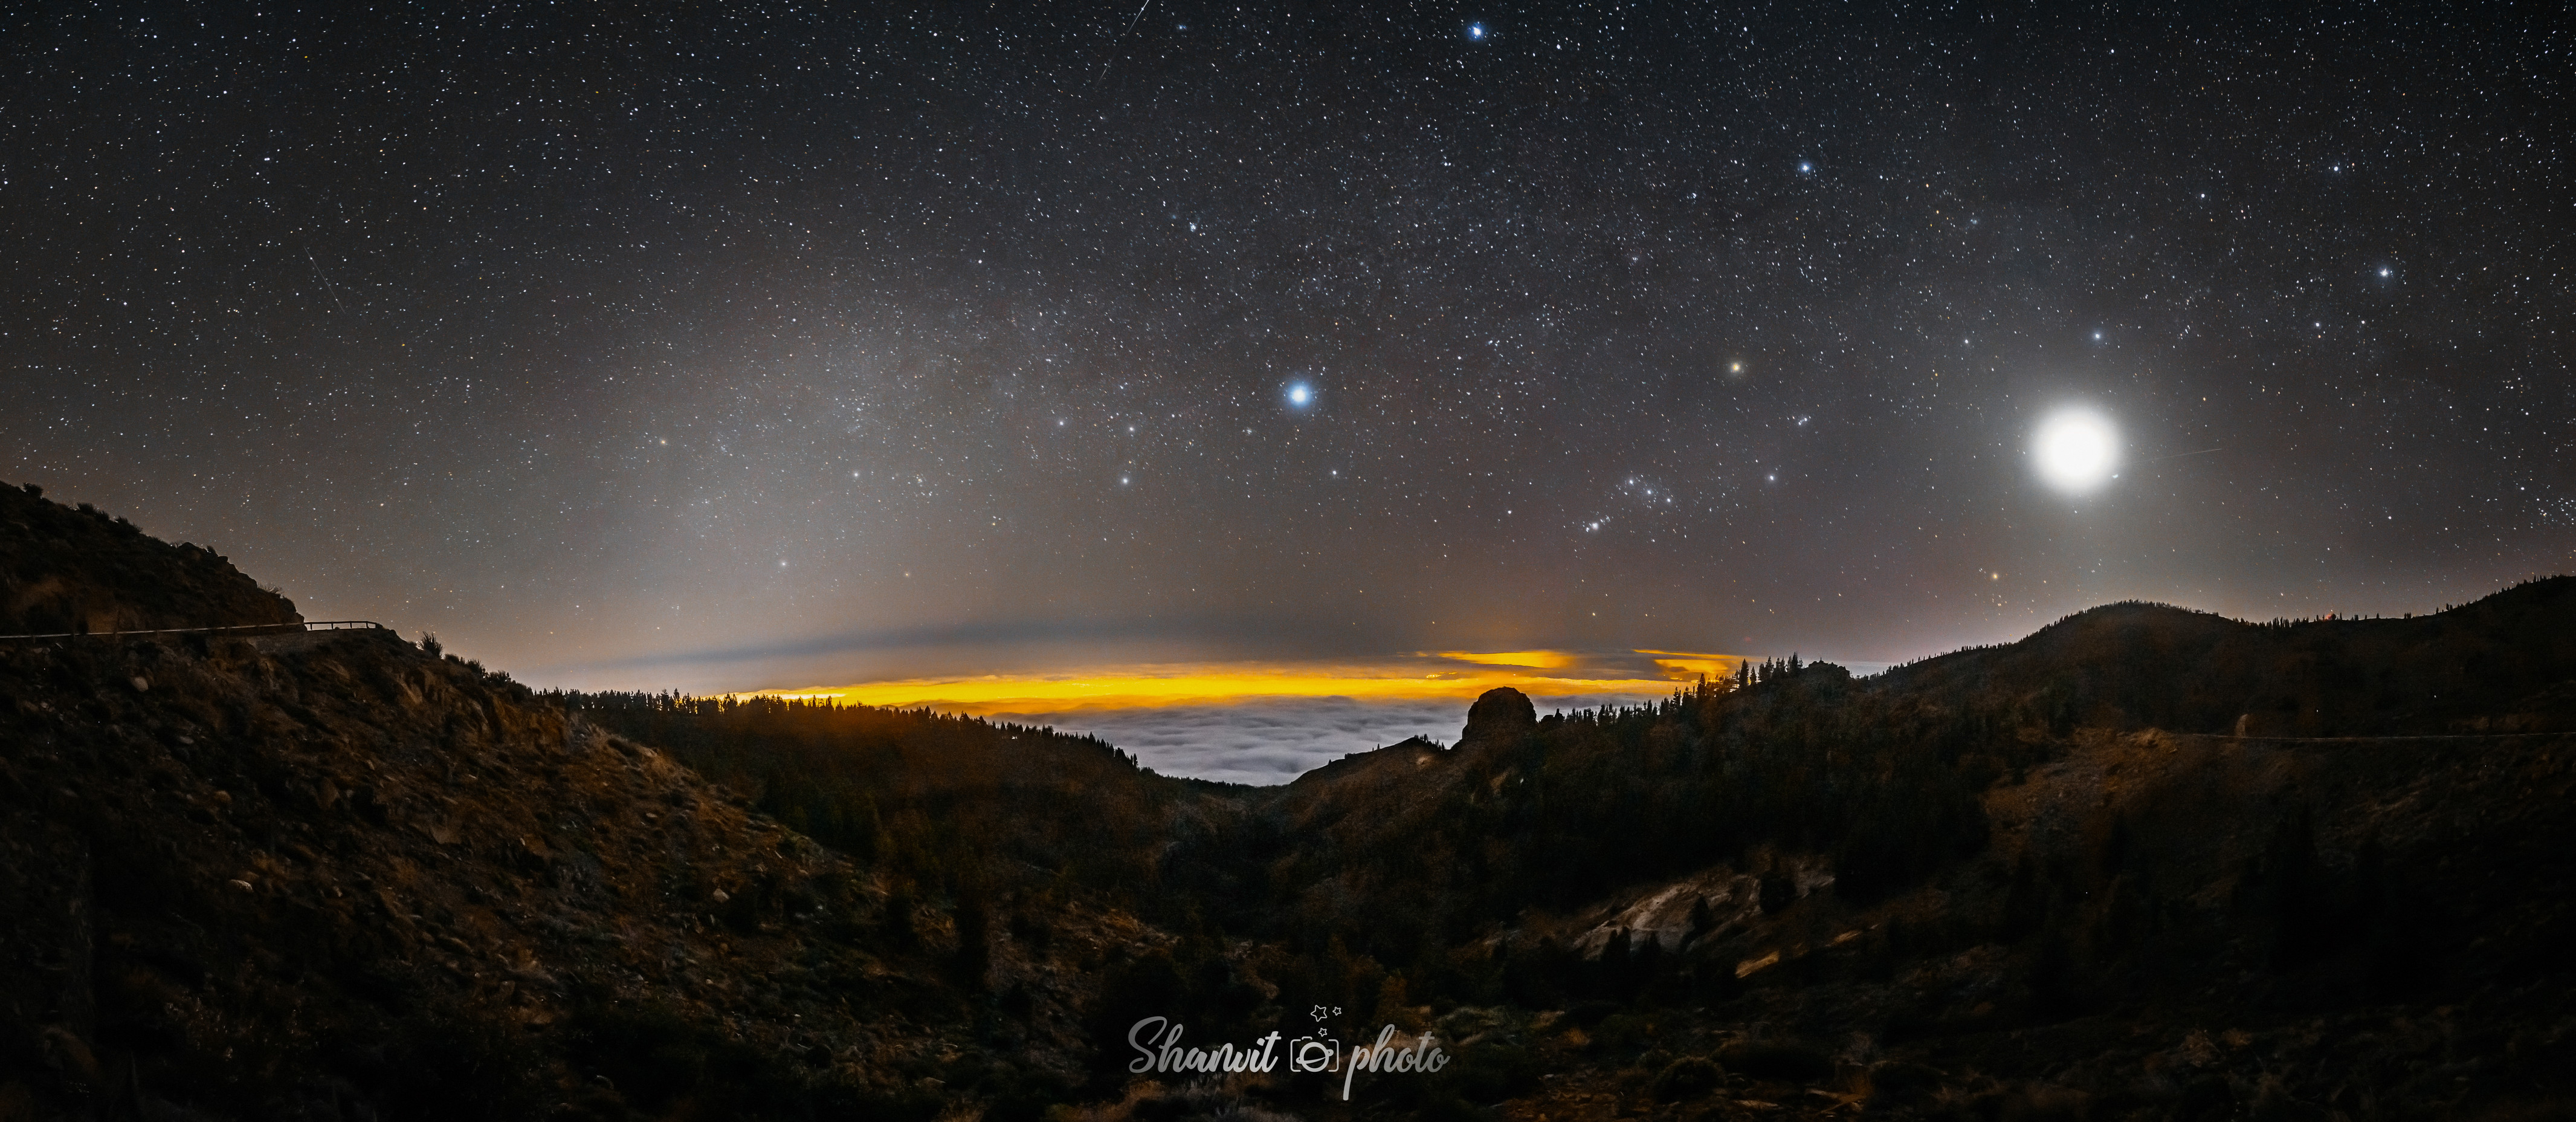 Timelapse Moonset above Tenerife mountains in 4K